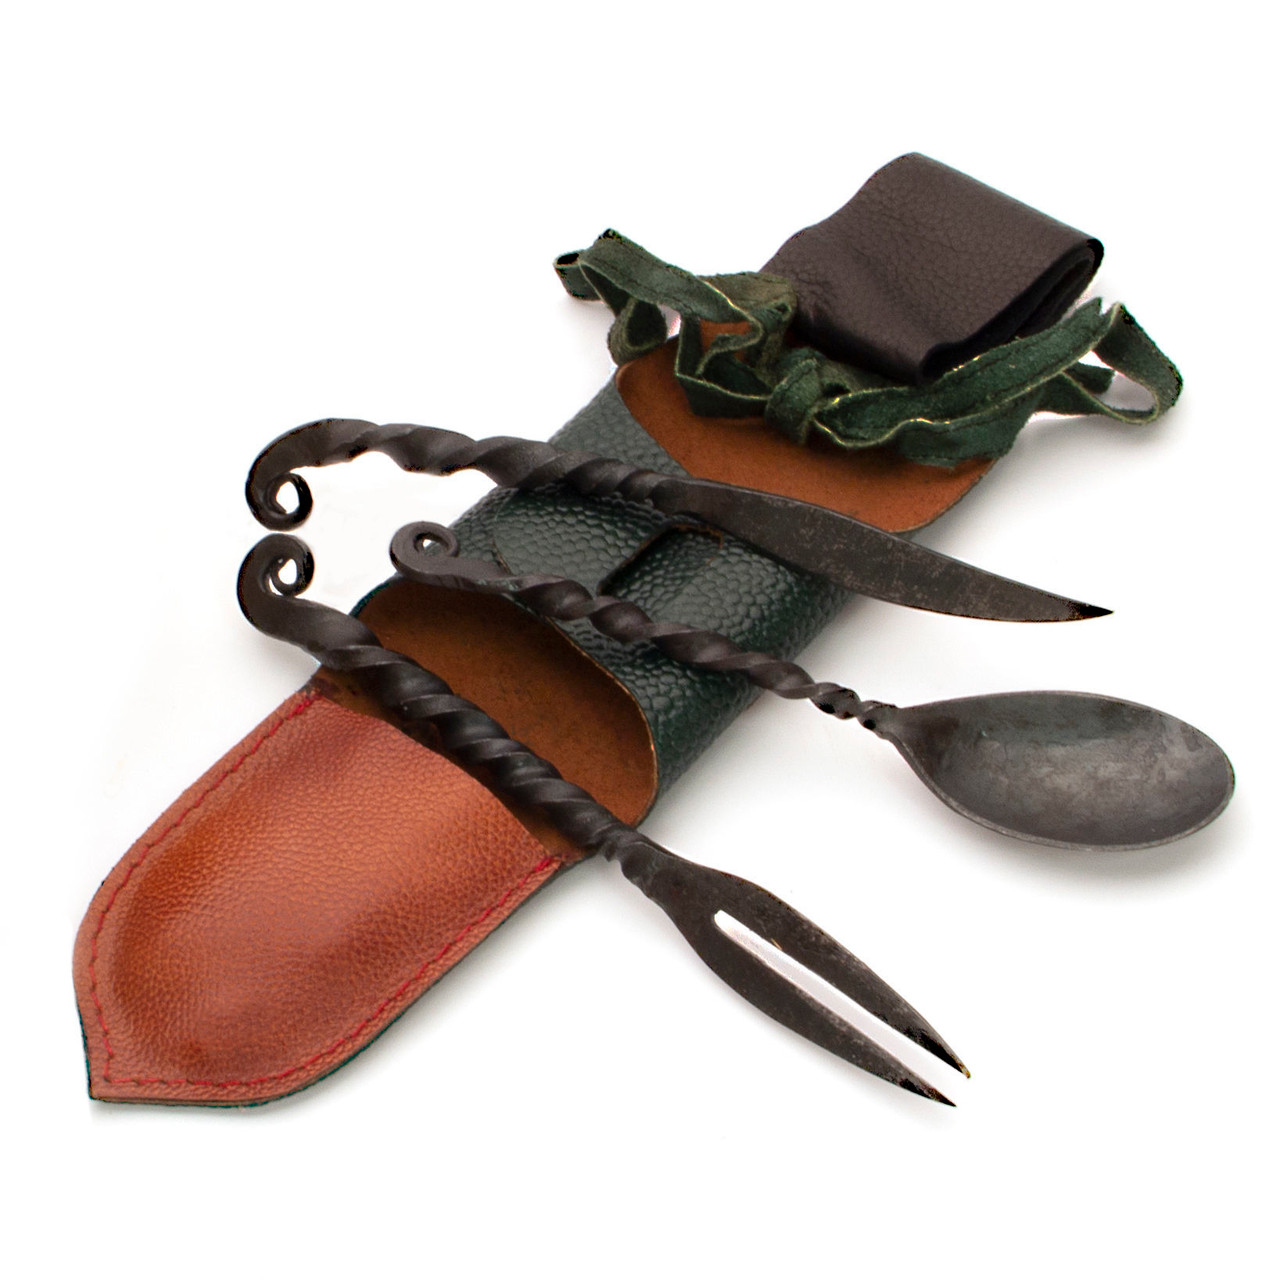 Feasting Utensils with Blacksmiths Twist and Leather Belt Pouch from Viking Celebration Kit